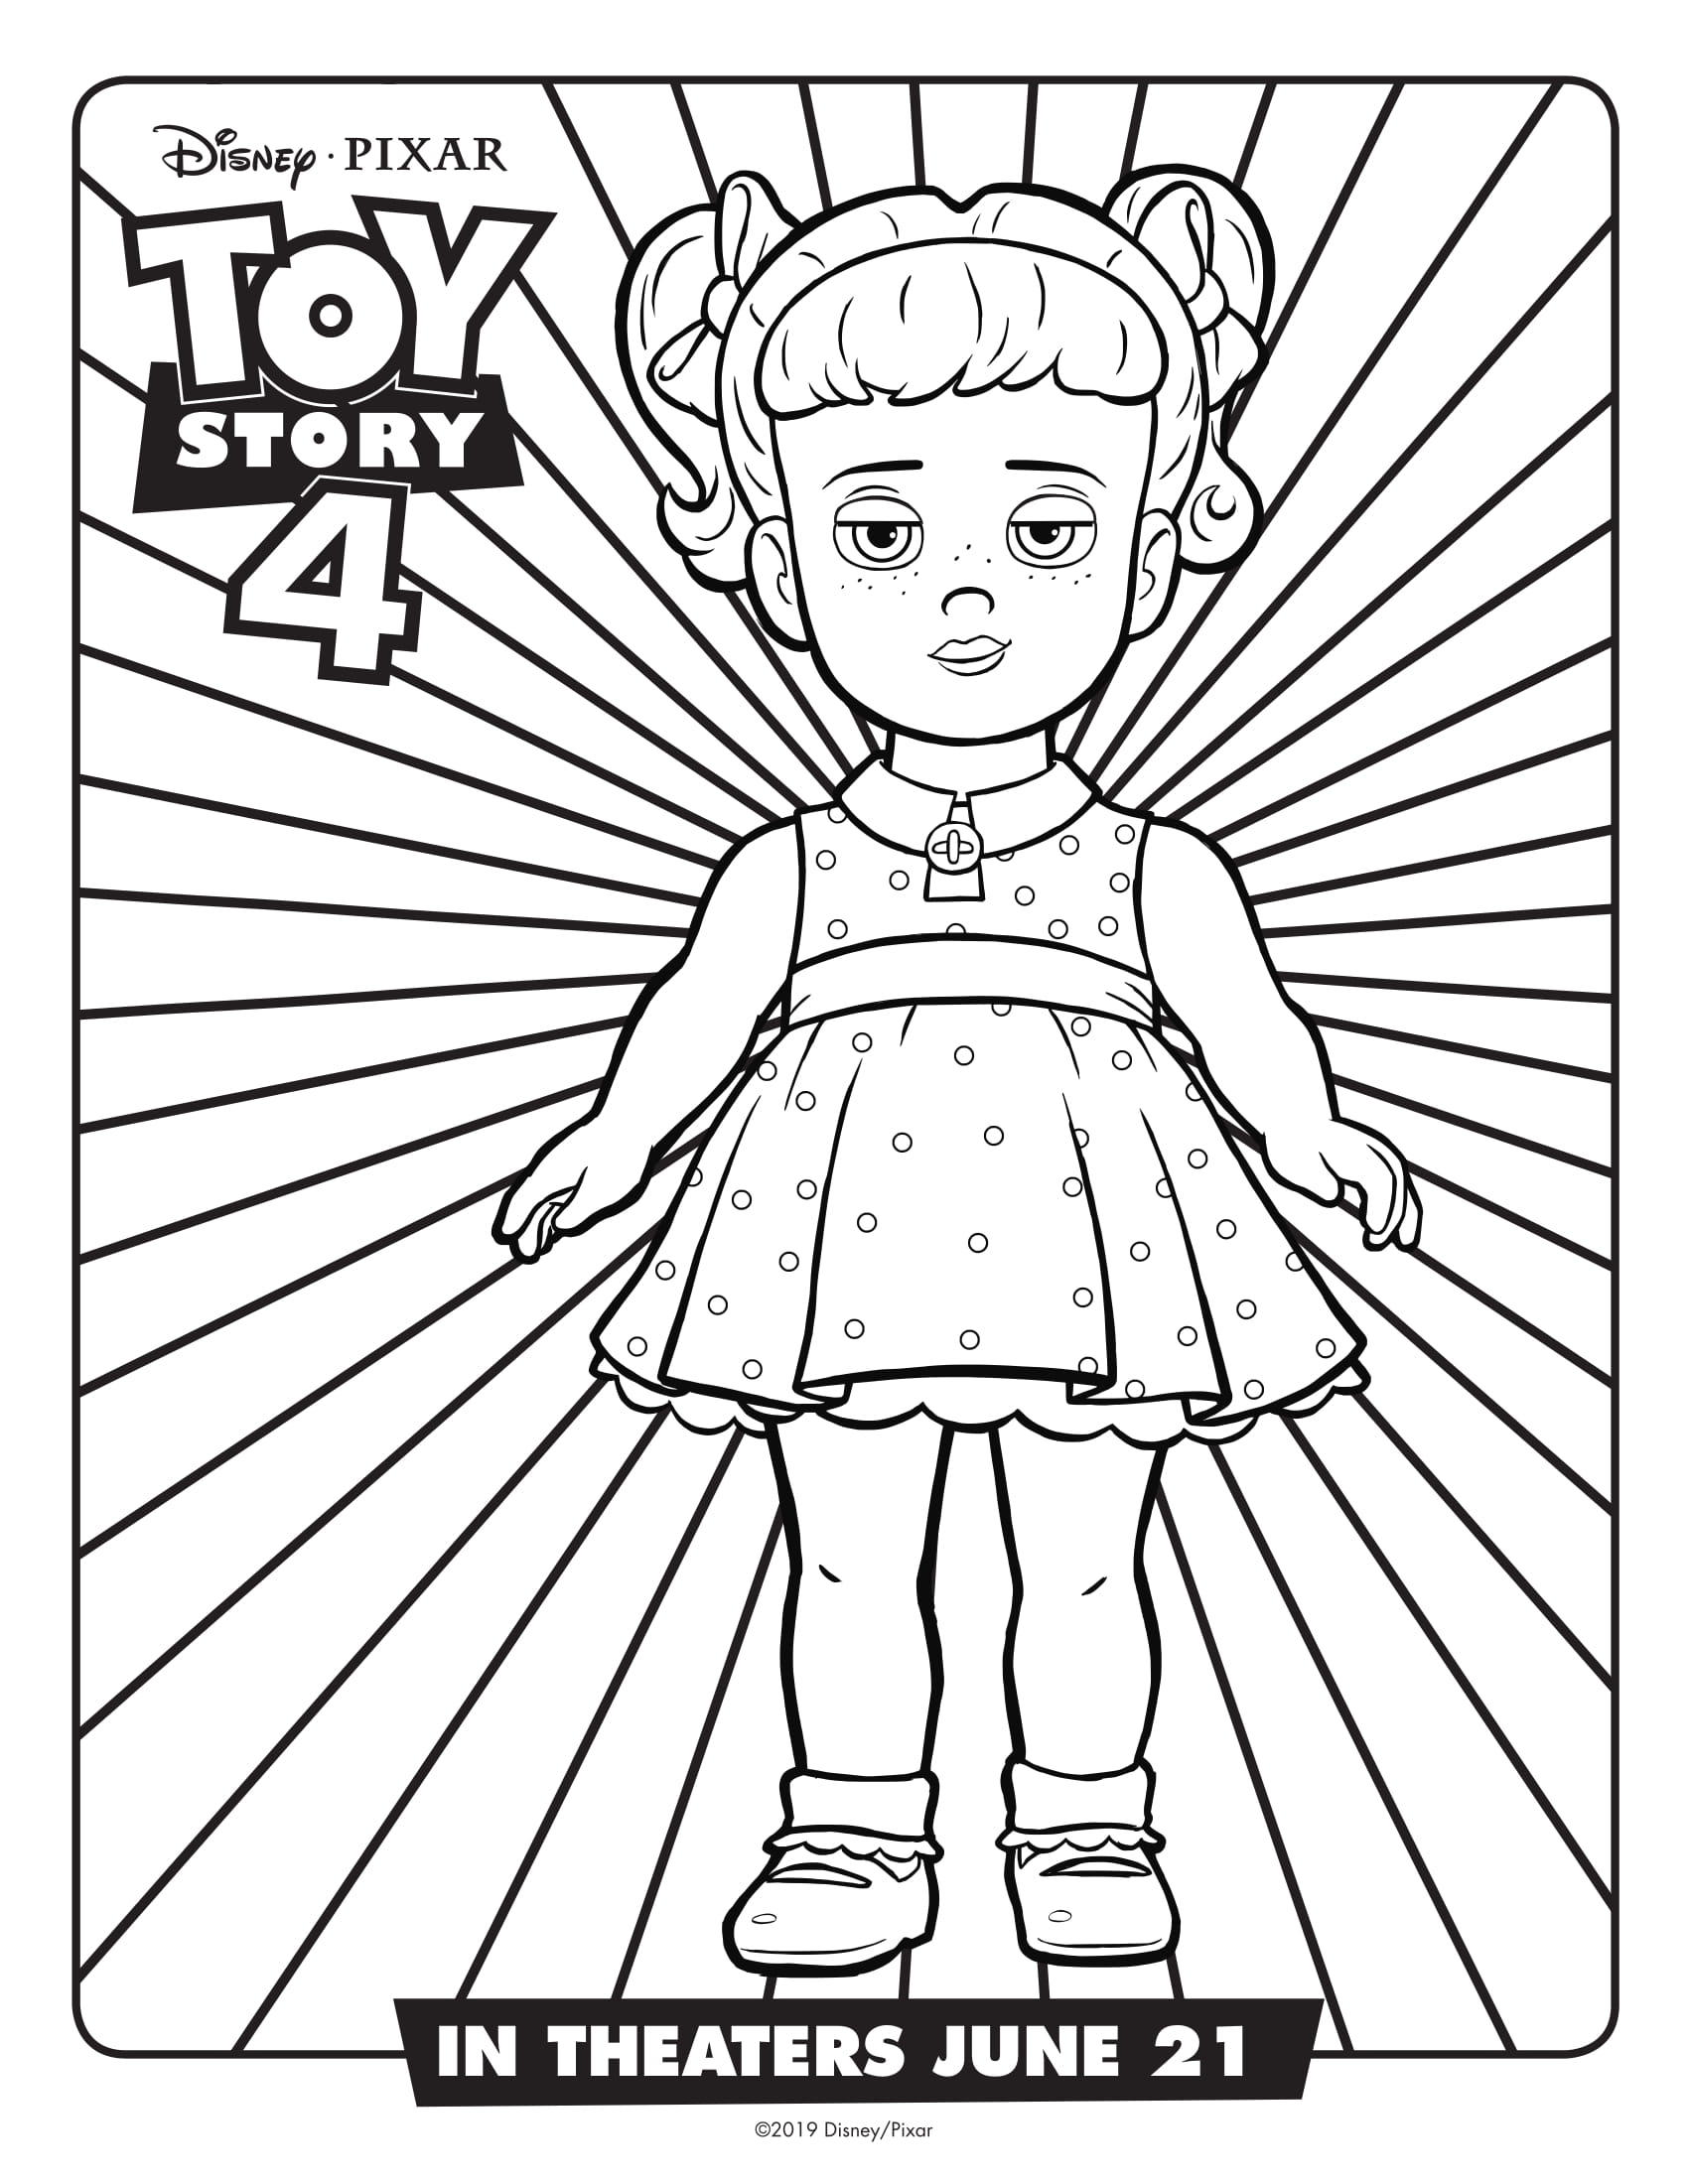 Toy Story 4 Coloring Pages Best Coloring Pages For Kids